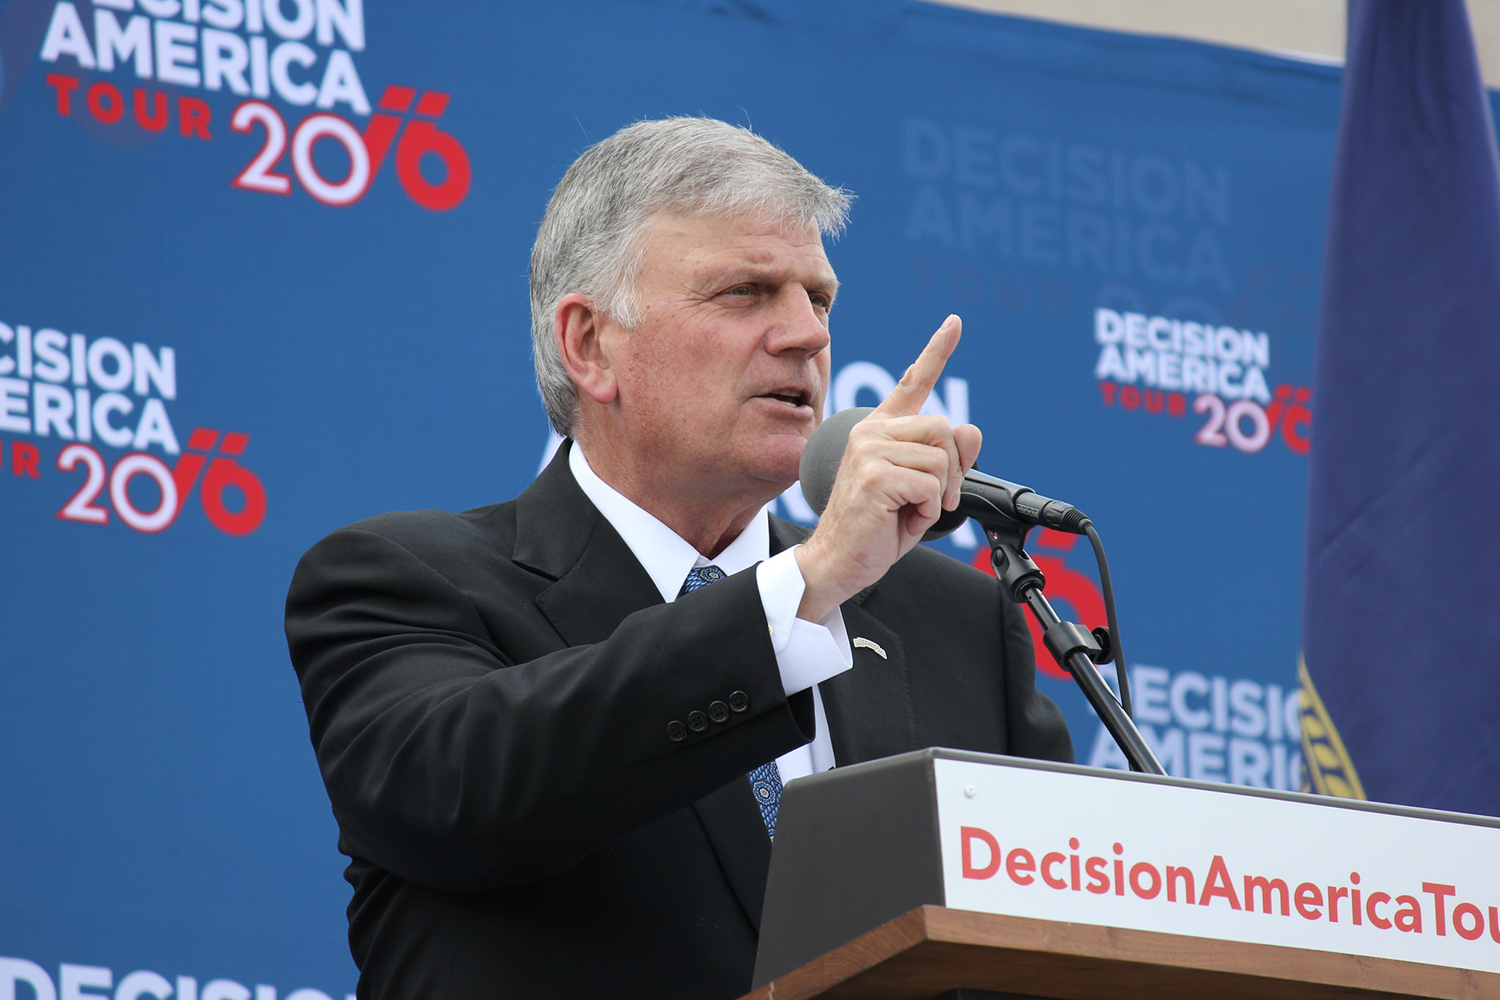 Franklin Graham is one of six ministers selected to pray at Donald Trump's inauguration on Jan. 20. (Photo/Matt Johnson/Creative Commons)